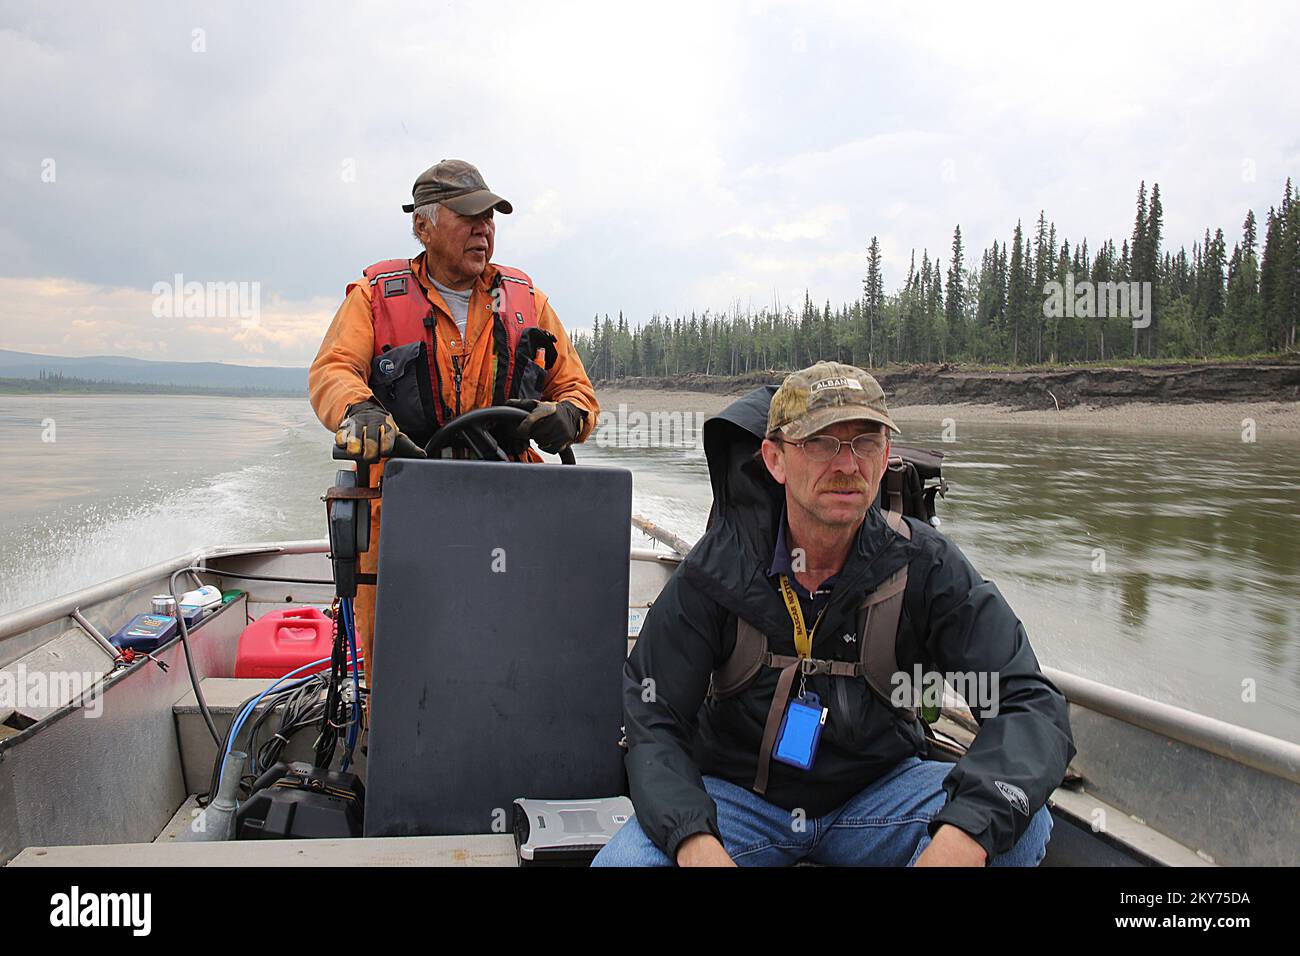 Hughes, Alaska, July 8, 2013   FEMA inspector Marty Williams is working with disaster survivor Ralph Williams in the remote areas of the Koyukuk River surveying the damages associated with severe flooding and ice jams that damaged his remote residence. Individuals and business owners who sustained losses in the designated area can begin applying for assistance by registering at www.disasterassistance.gov or by calling 1-800-621-FEMA (3362). Adam Dubrowa/ FEMA.. Photographs Relating to Disasters and Emergency Management Programs, Activities, and Officials Stock Photo